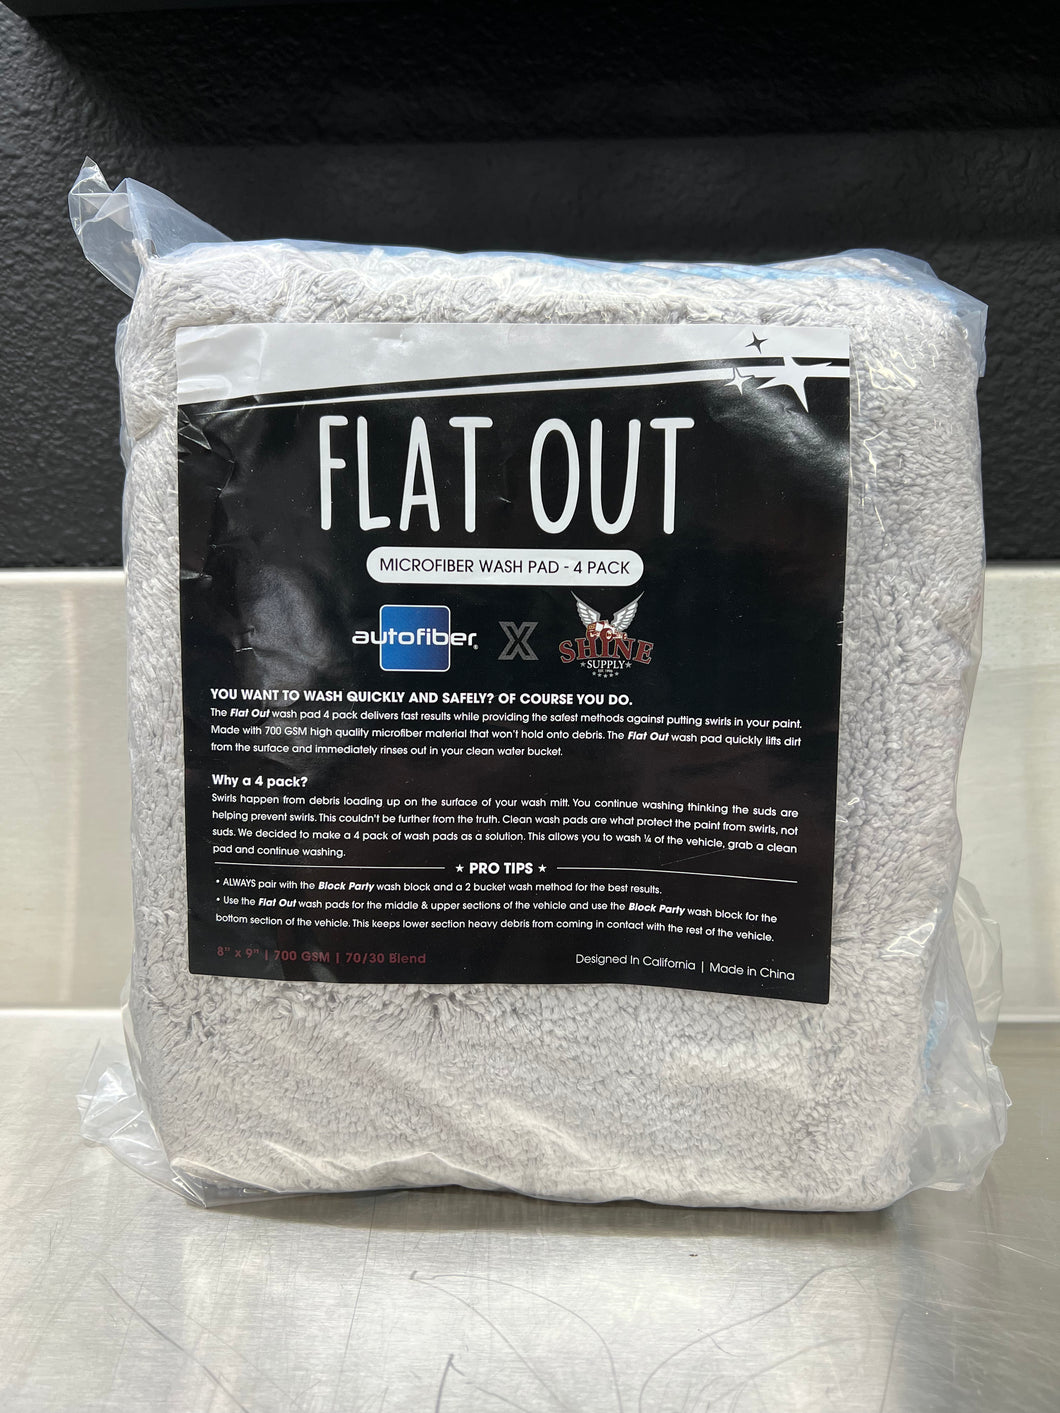 FLAT OUT WASH PADS from Autofiber